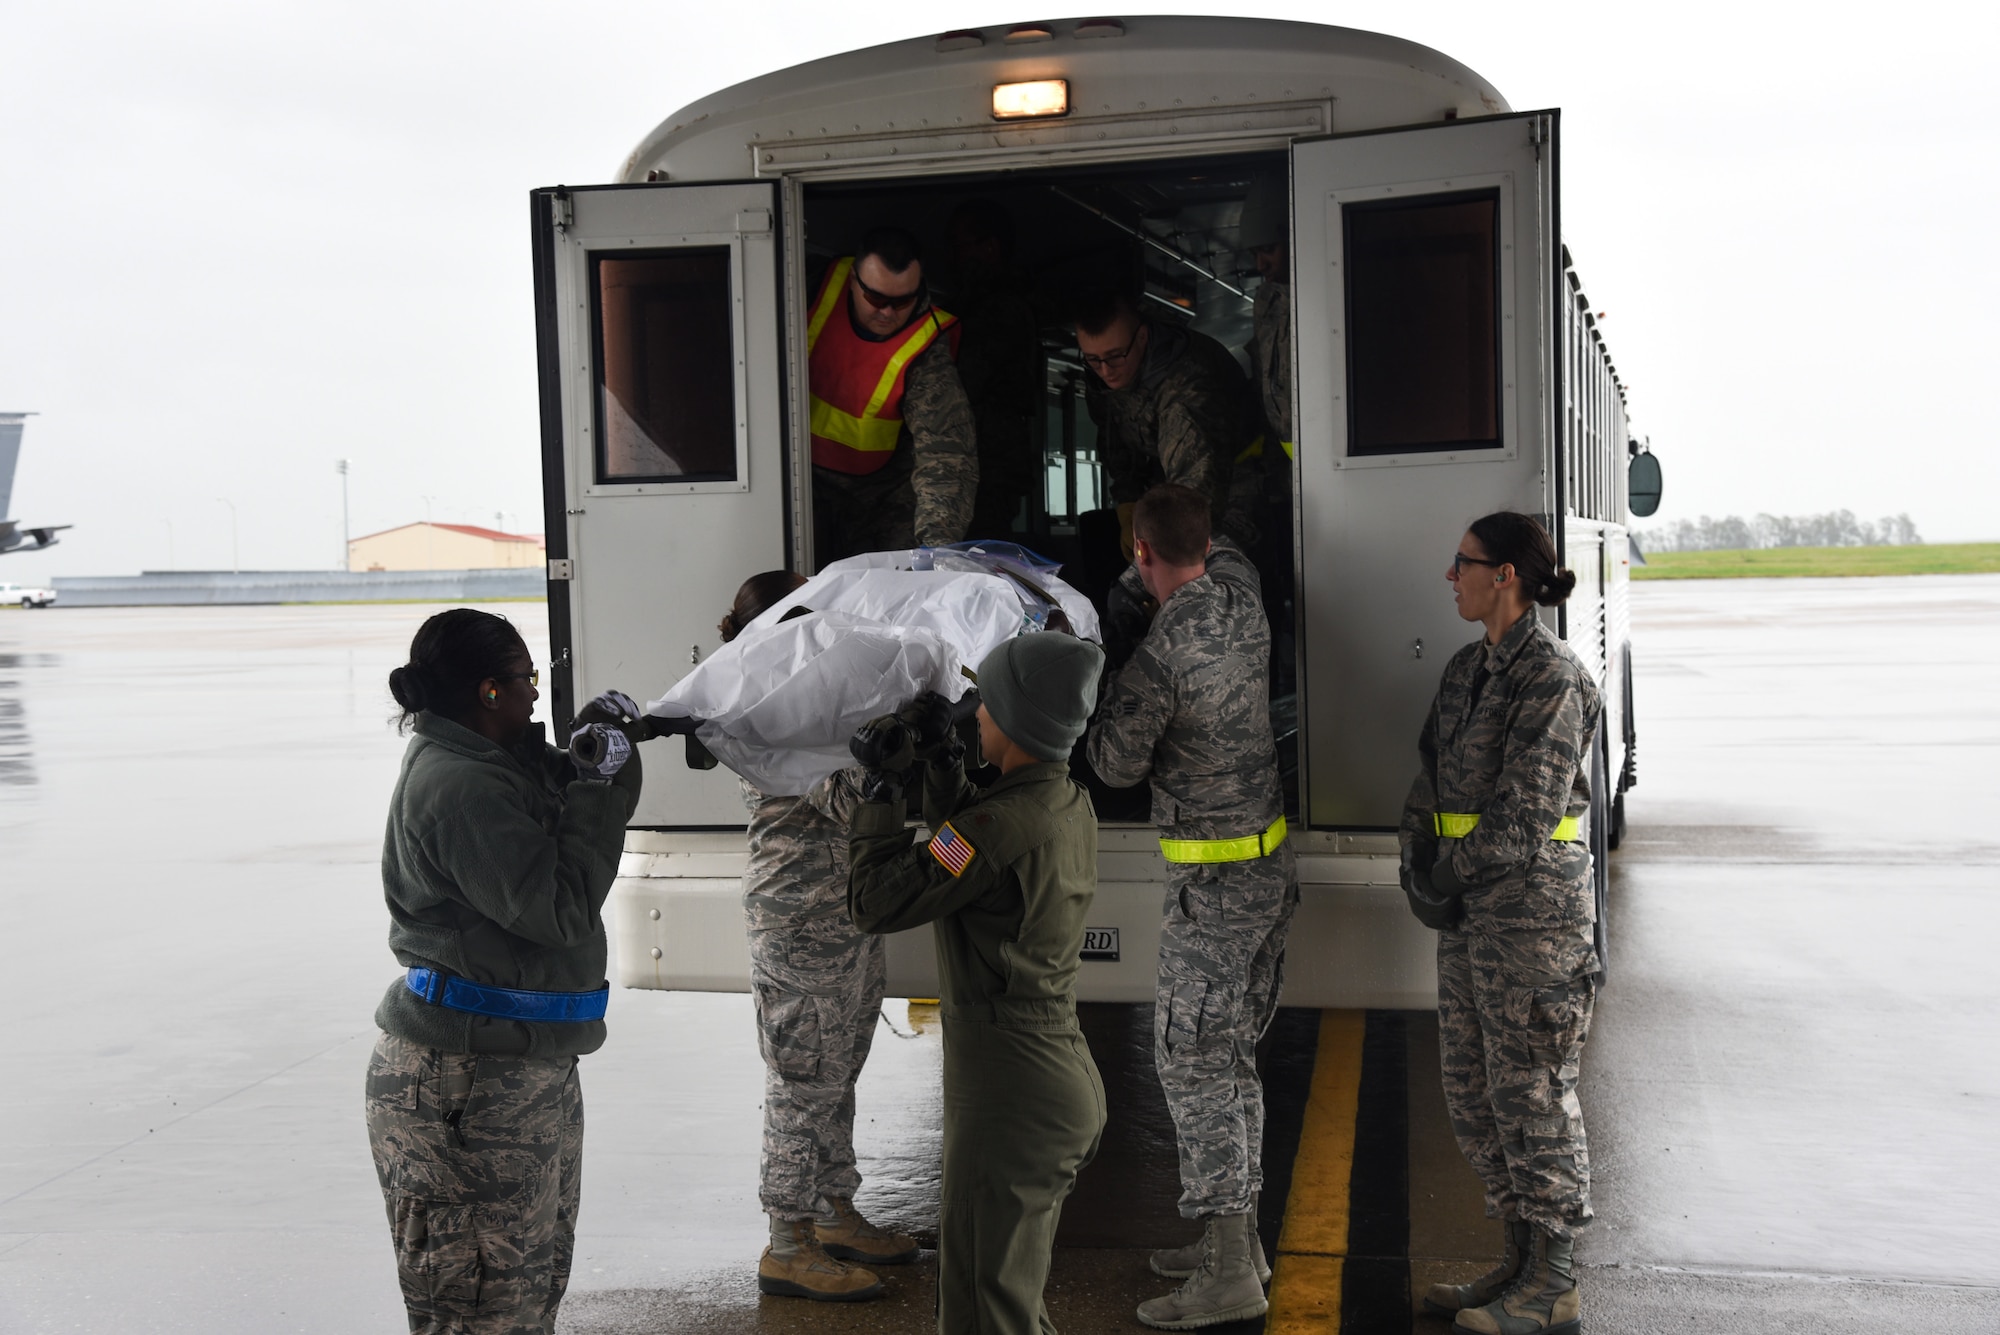 An aeromedical evacuation team litter carries a simulated patient at Travis Air Force Base, Calif., March 24, 2017. This scenario took place the first day of the two-day aeromedical evacuation training exercise, Patriot Delta. (U.S. Air Force photo by Senior Airman Sam Salopek)